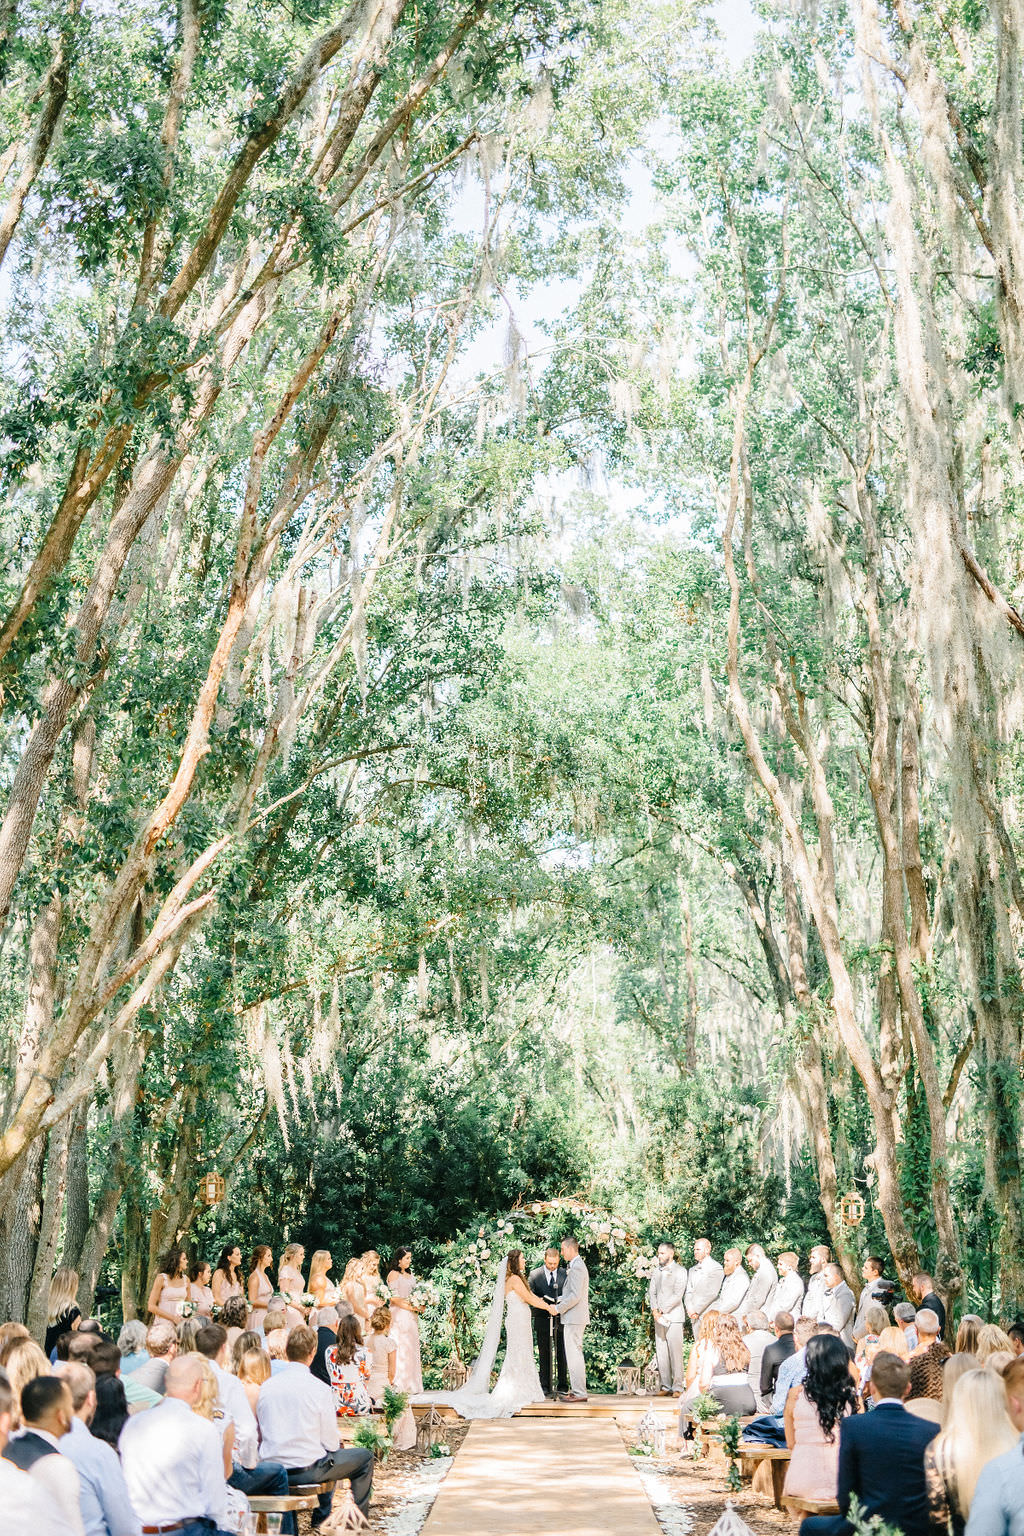 Enchanting Outdoor Wedding Ceremony Under Canopy of Oak Trees, Bride and Groom Exchanging Wedding Vows | Whimsical Tampa Bay Venue Florida Rustic Barn Weddings